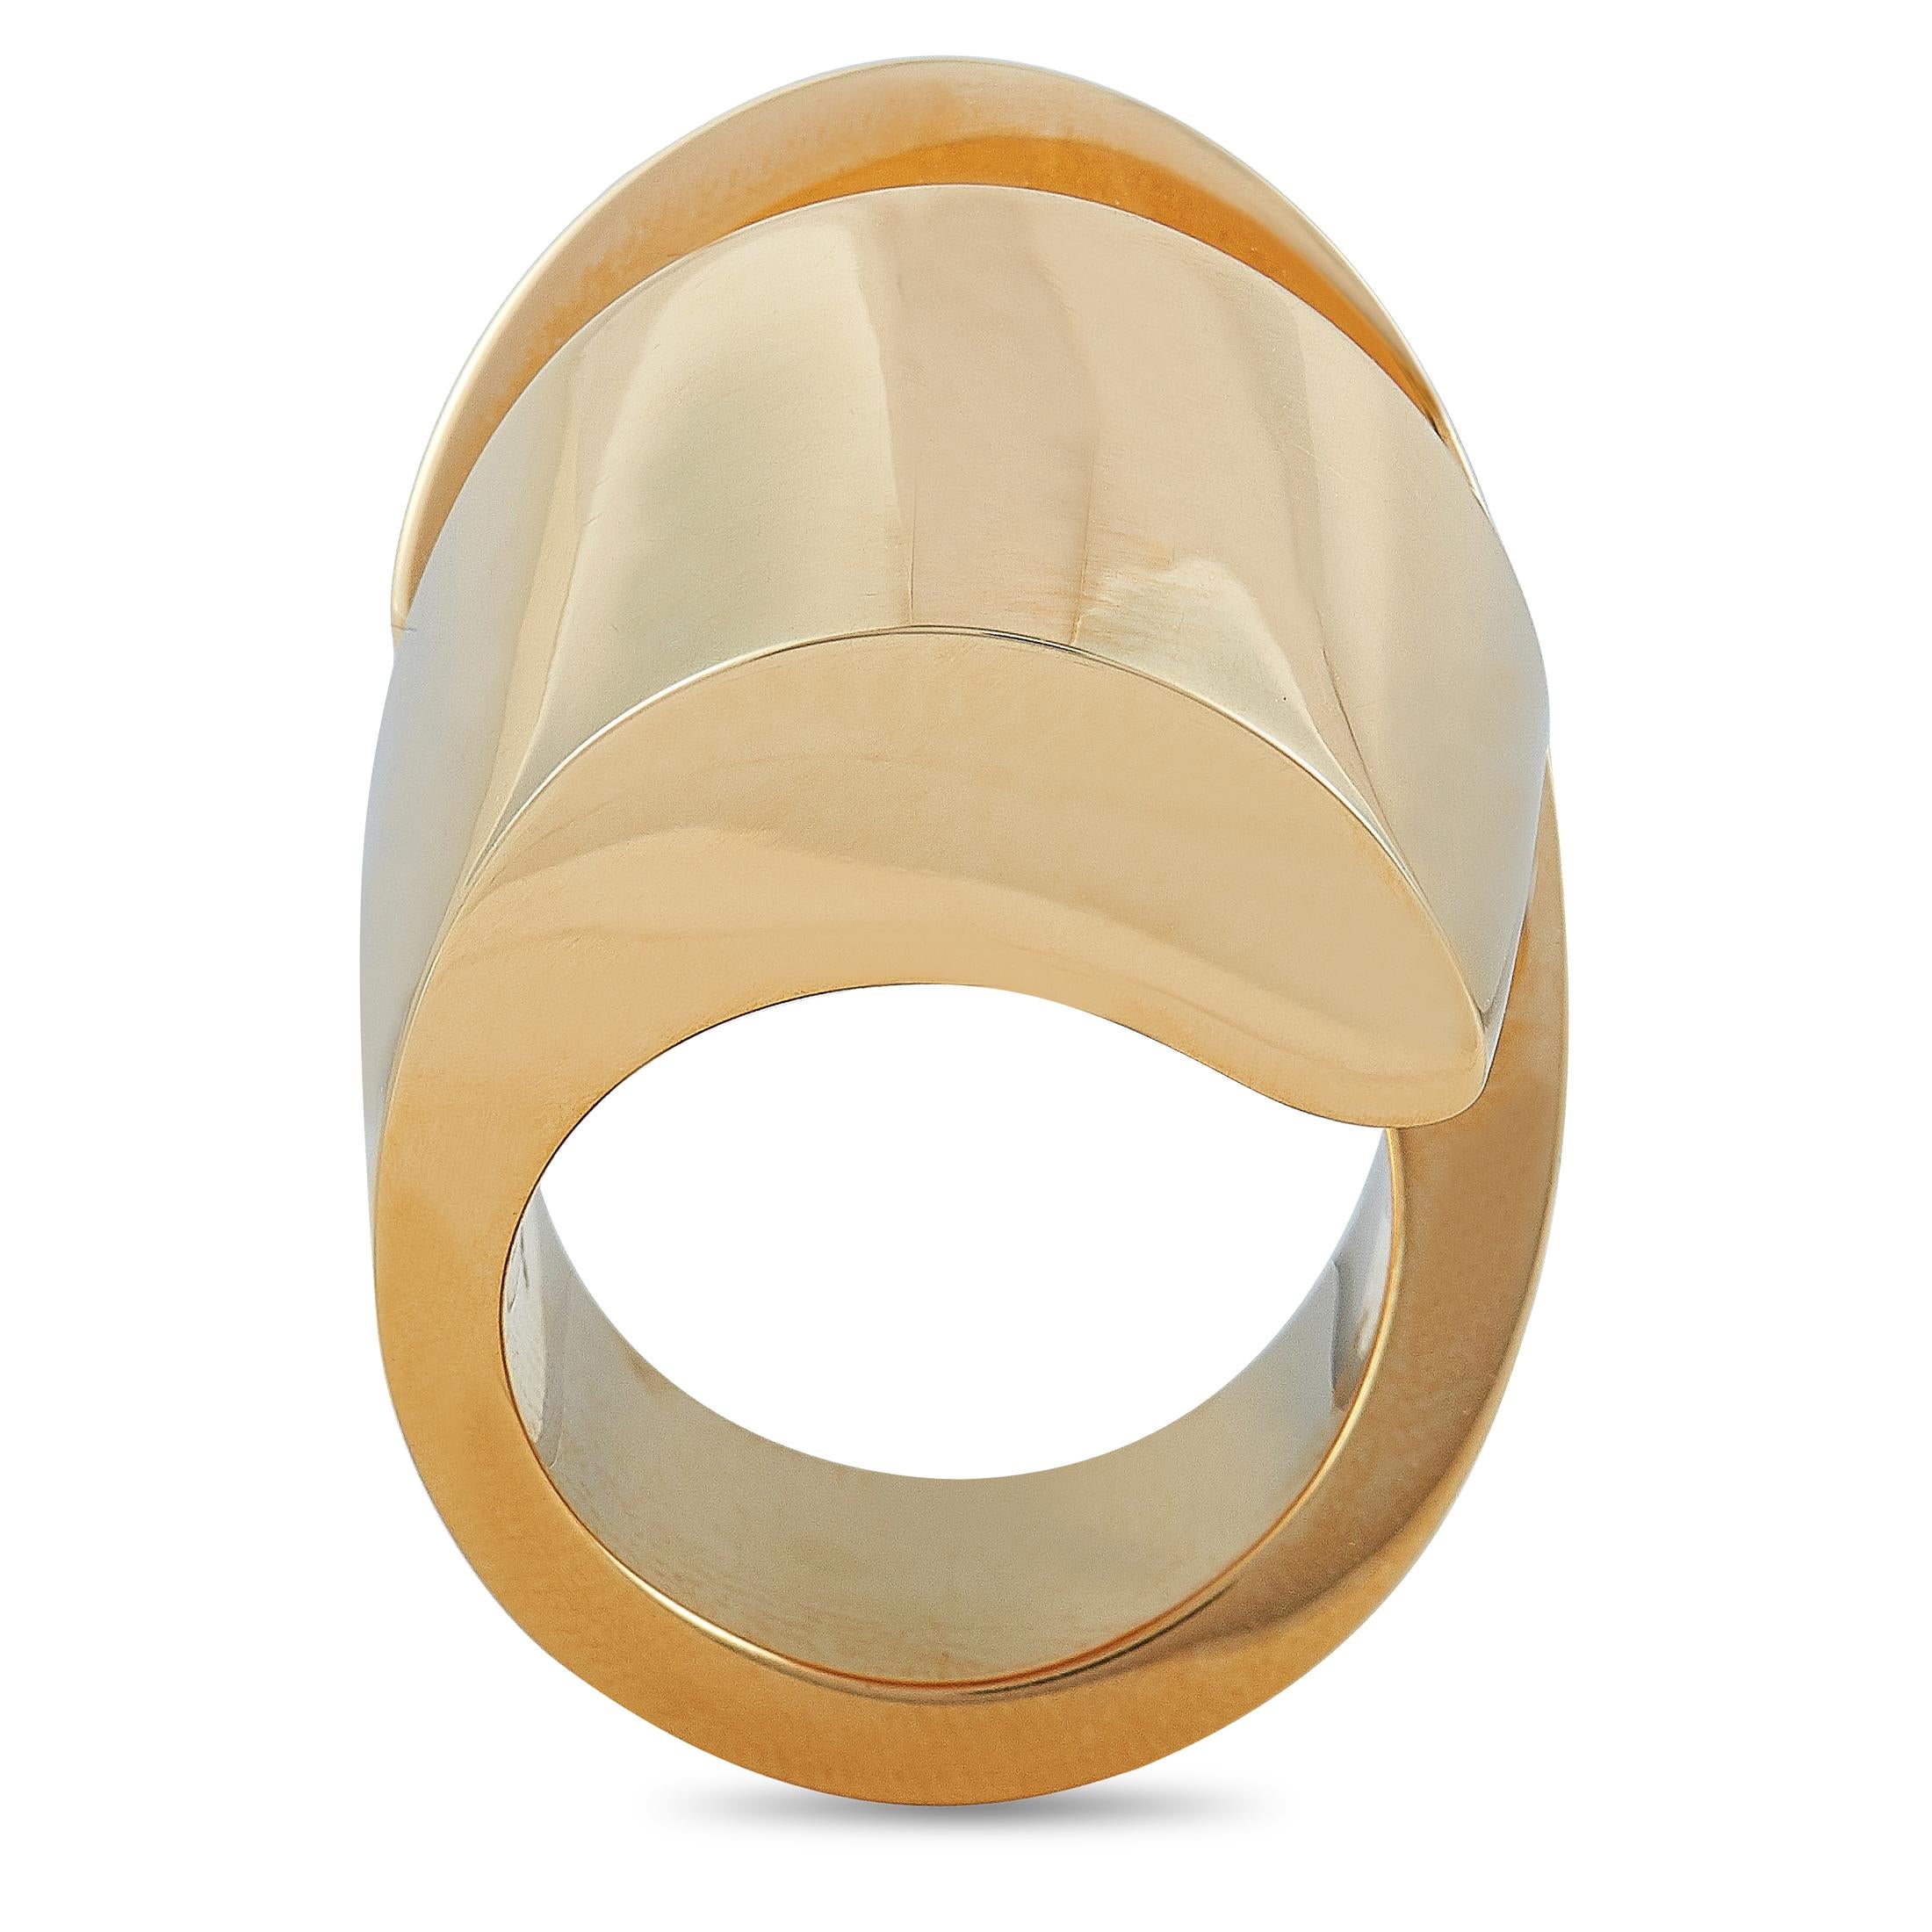 The Vhernier “Kiss” ring is crafted from 18K rose gold and weighs 26.4 grams, boasting band thickness of 10 mm and top height of 12 mm.
Ring Size: 7

This item is offered in brand new condition and includes the manufacturer’s box.